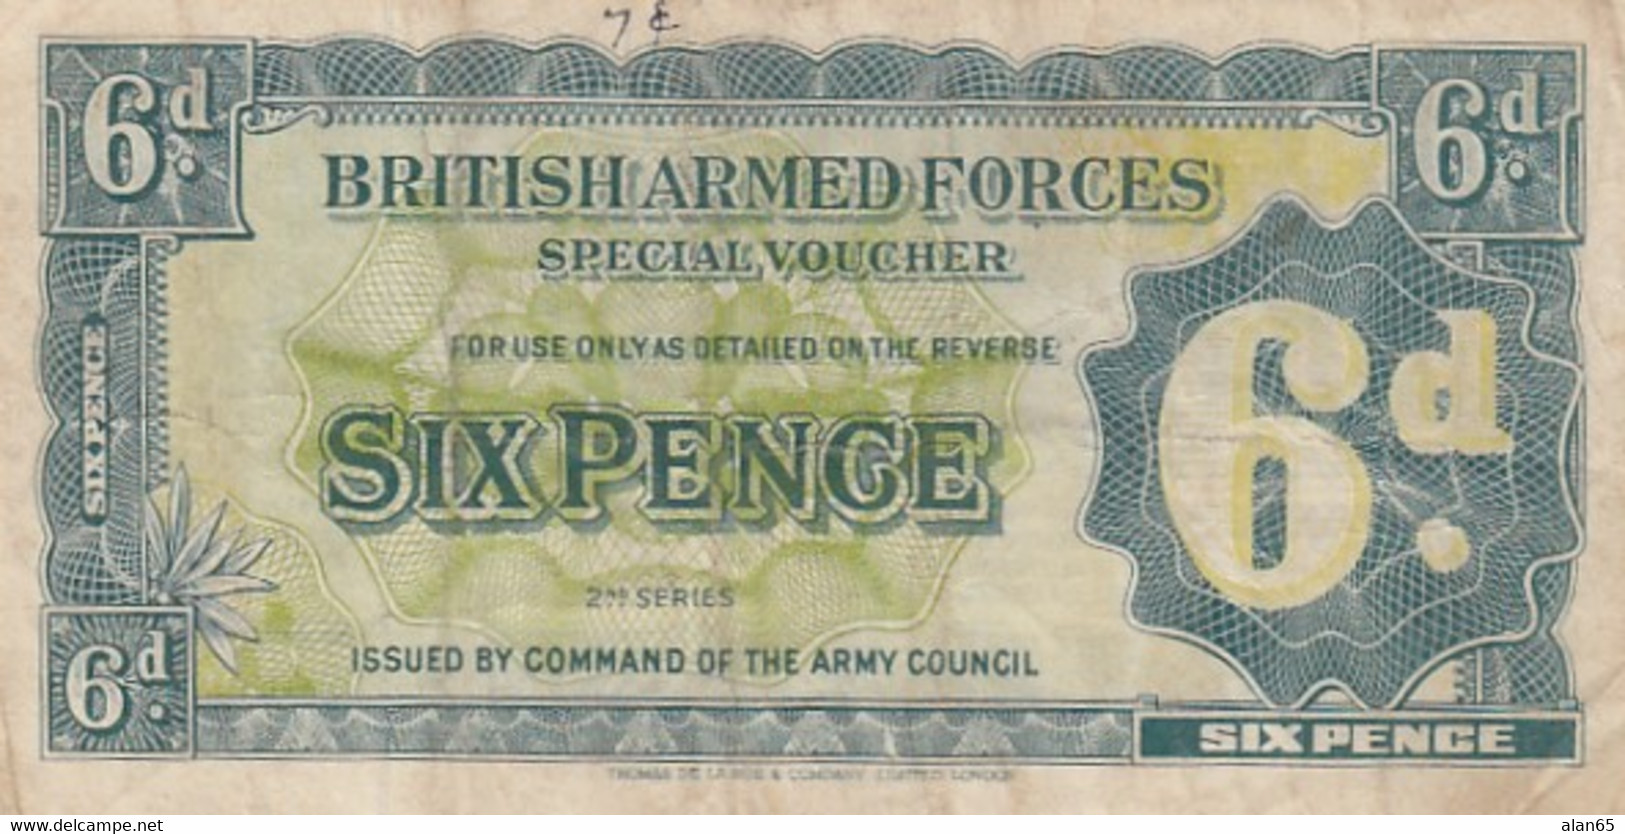 Great Britain #M17a 6 Pence 1948 British Armed Forces Special Voucher Currency - British Armed Forces & Special Vouchers